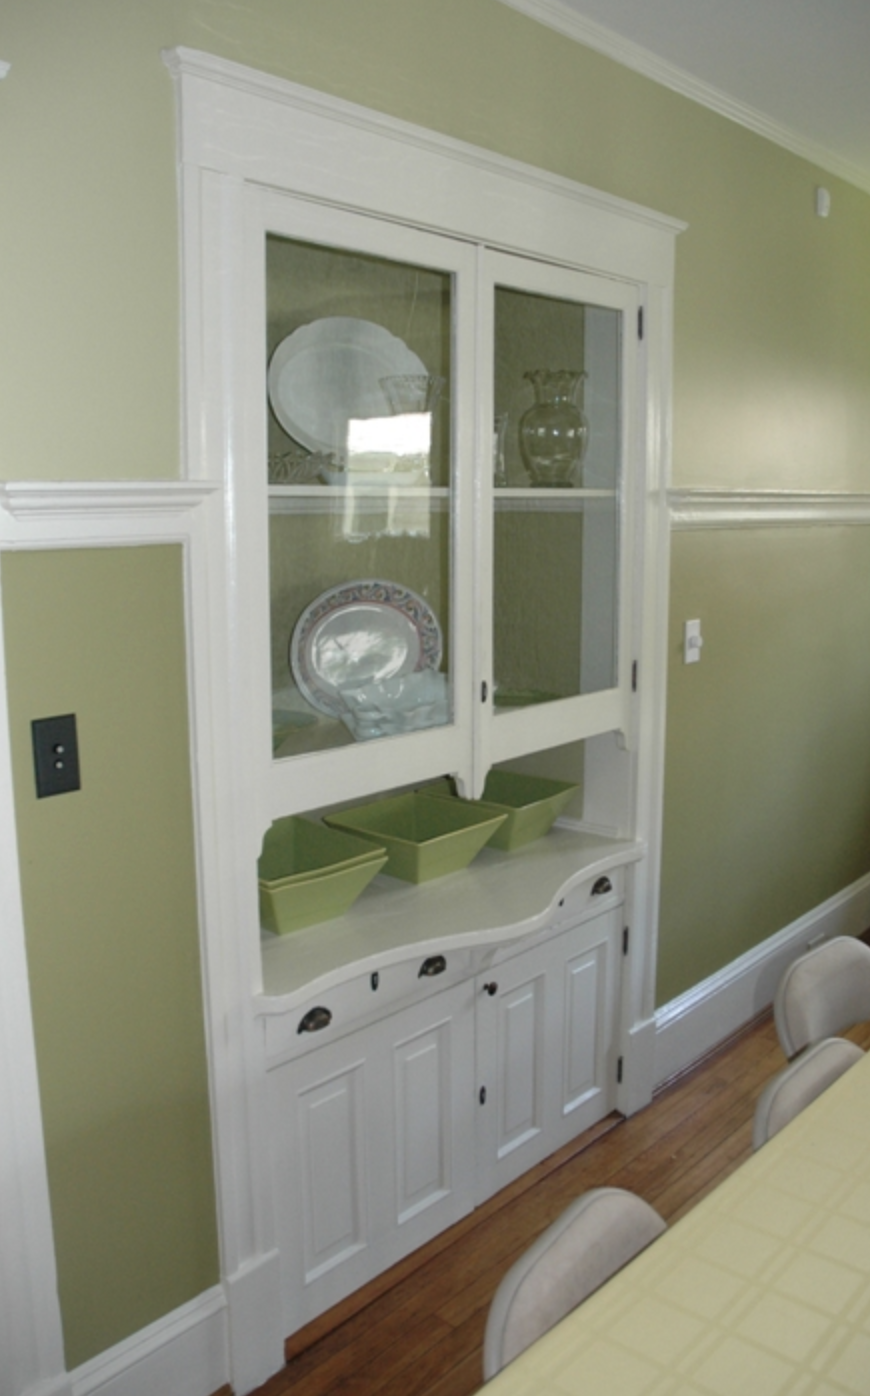 Built-In China Cabinet